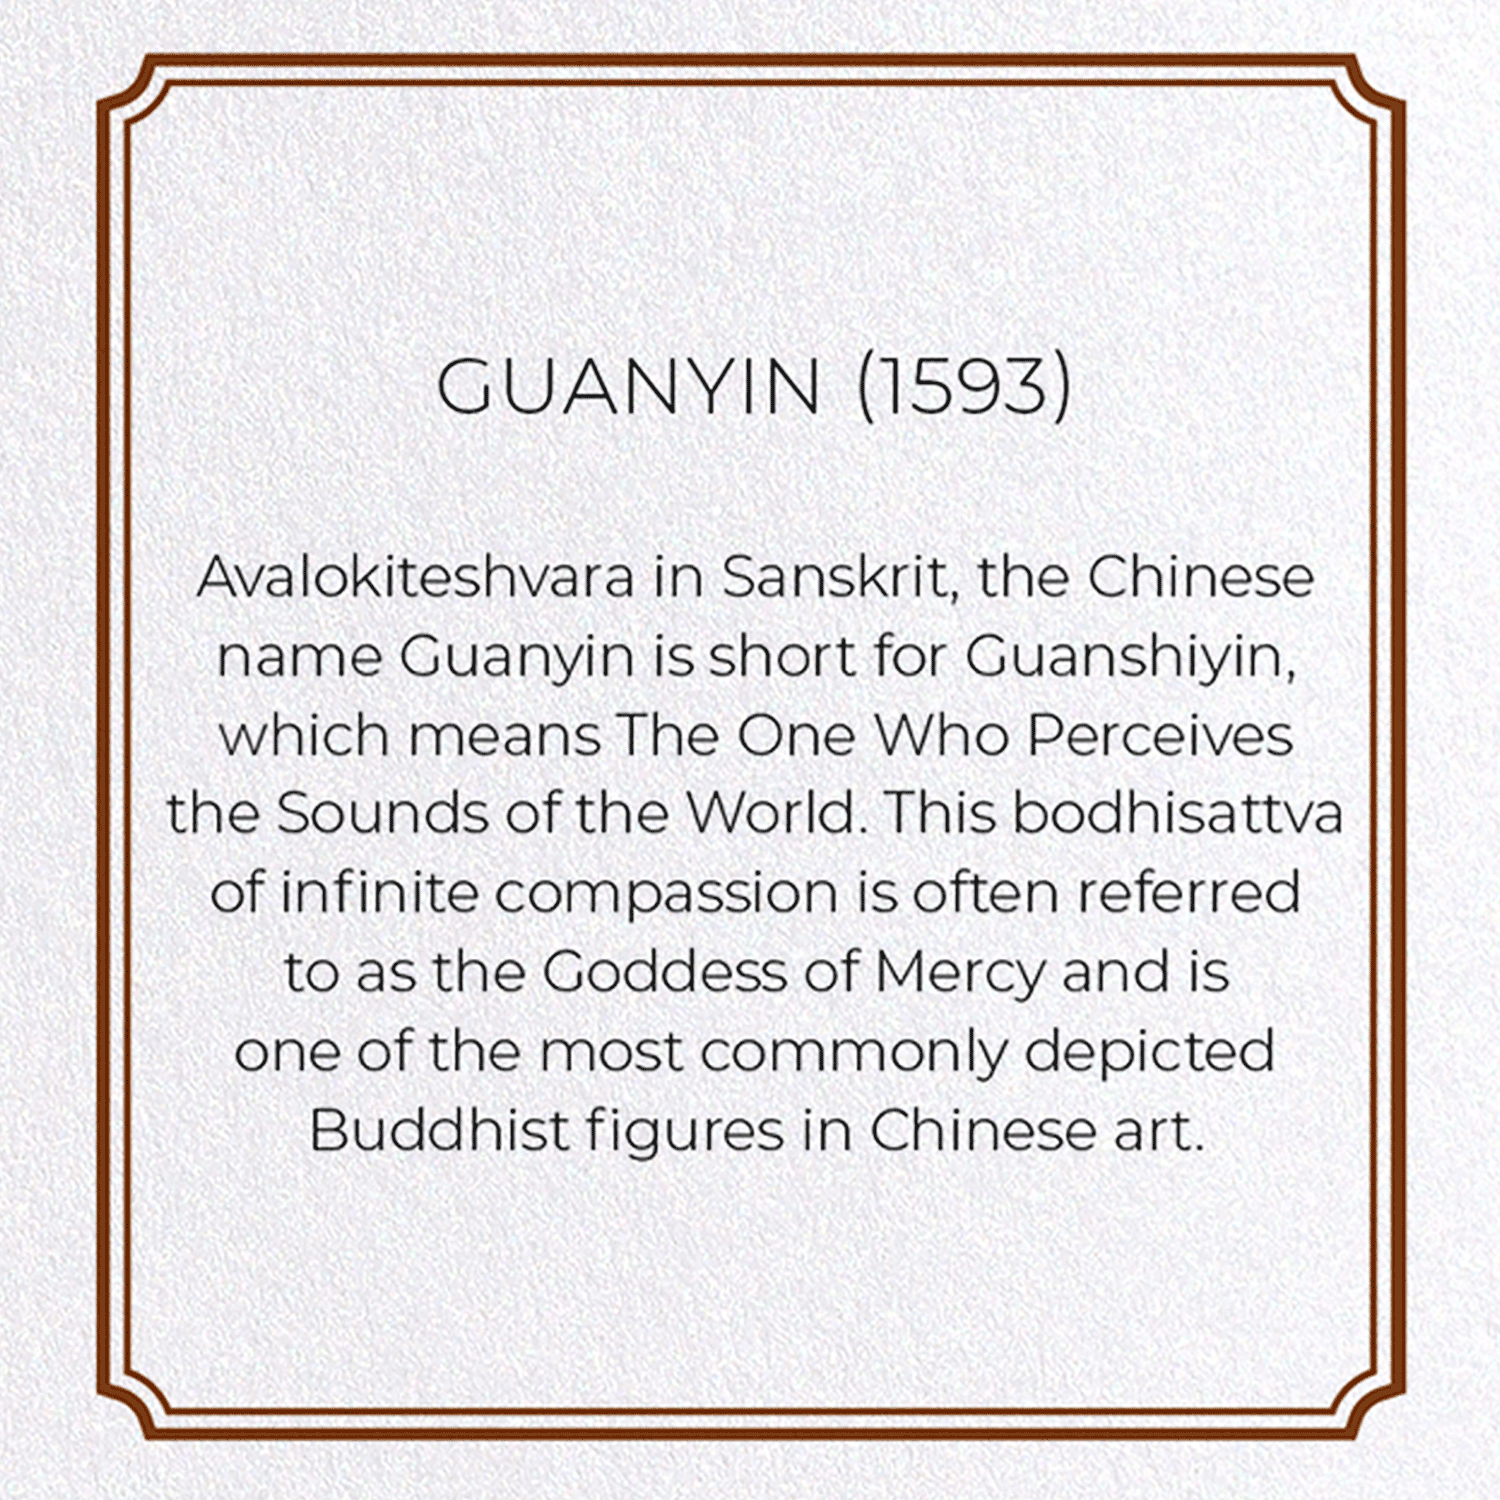 GUANYIN (1593): Painting Greeting Card